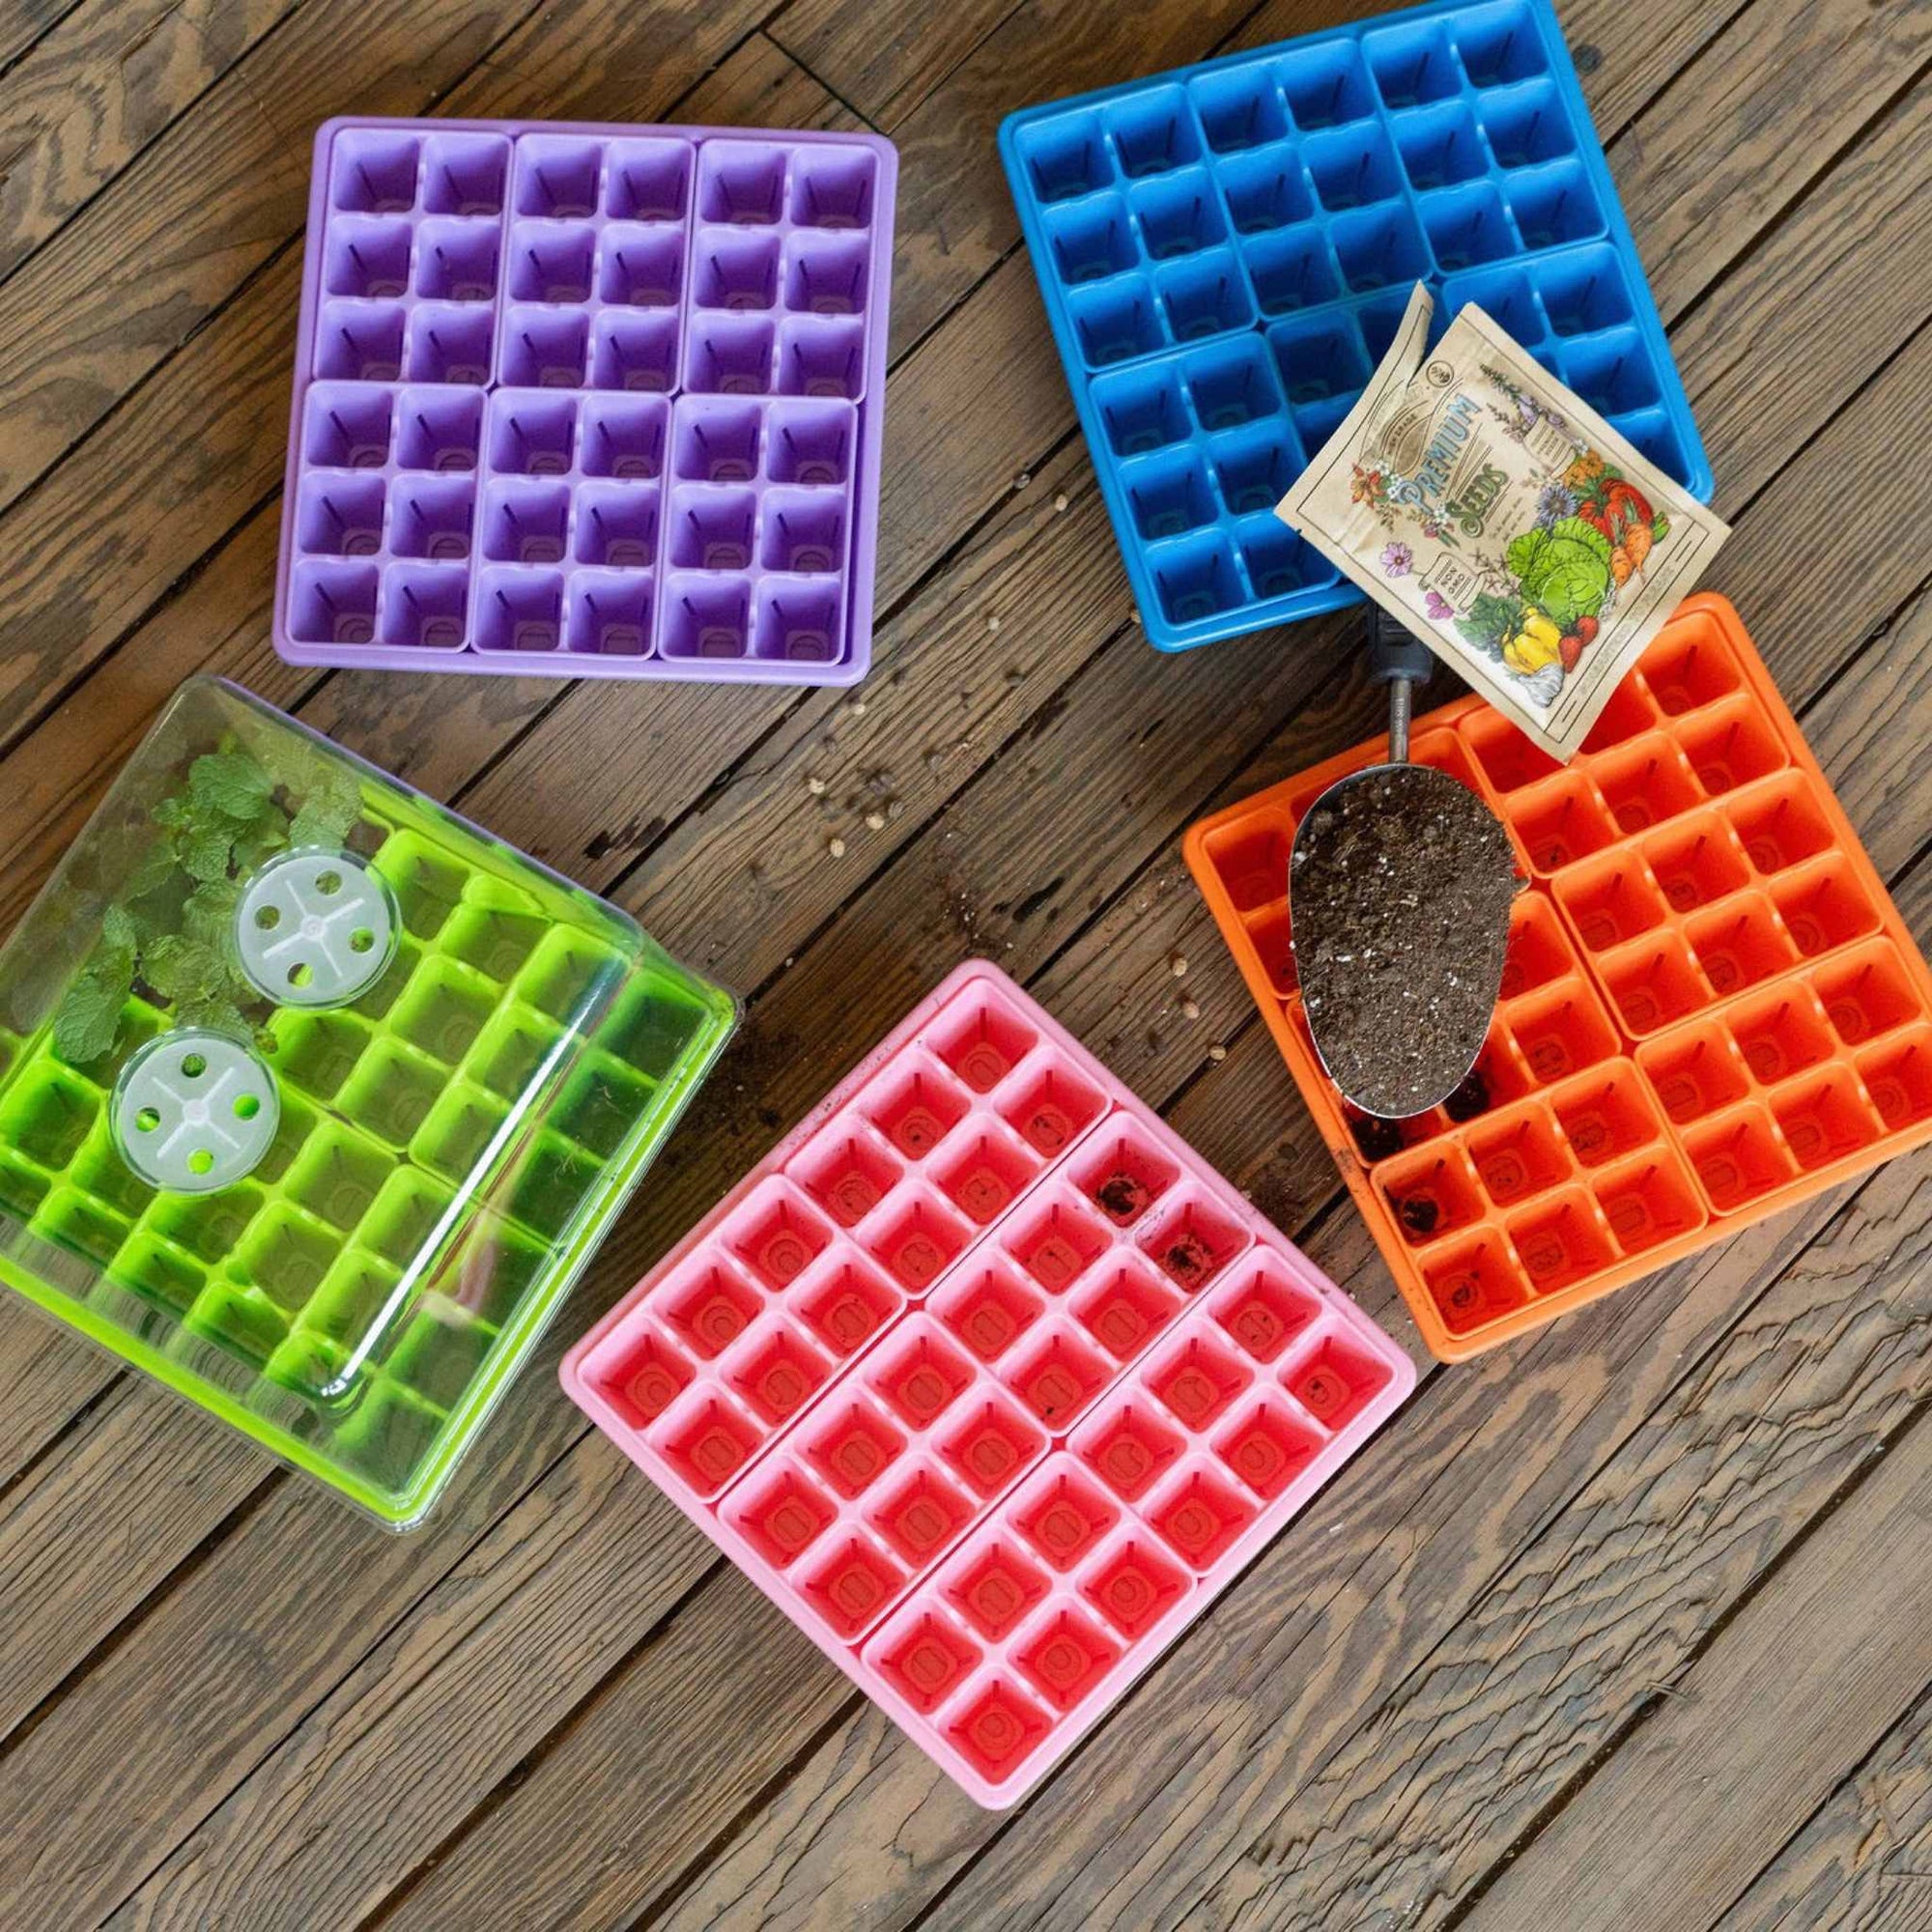 1010 Seed Starting Kits in Purple, Blue, Green, Pink, and Orange